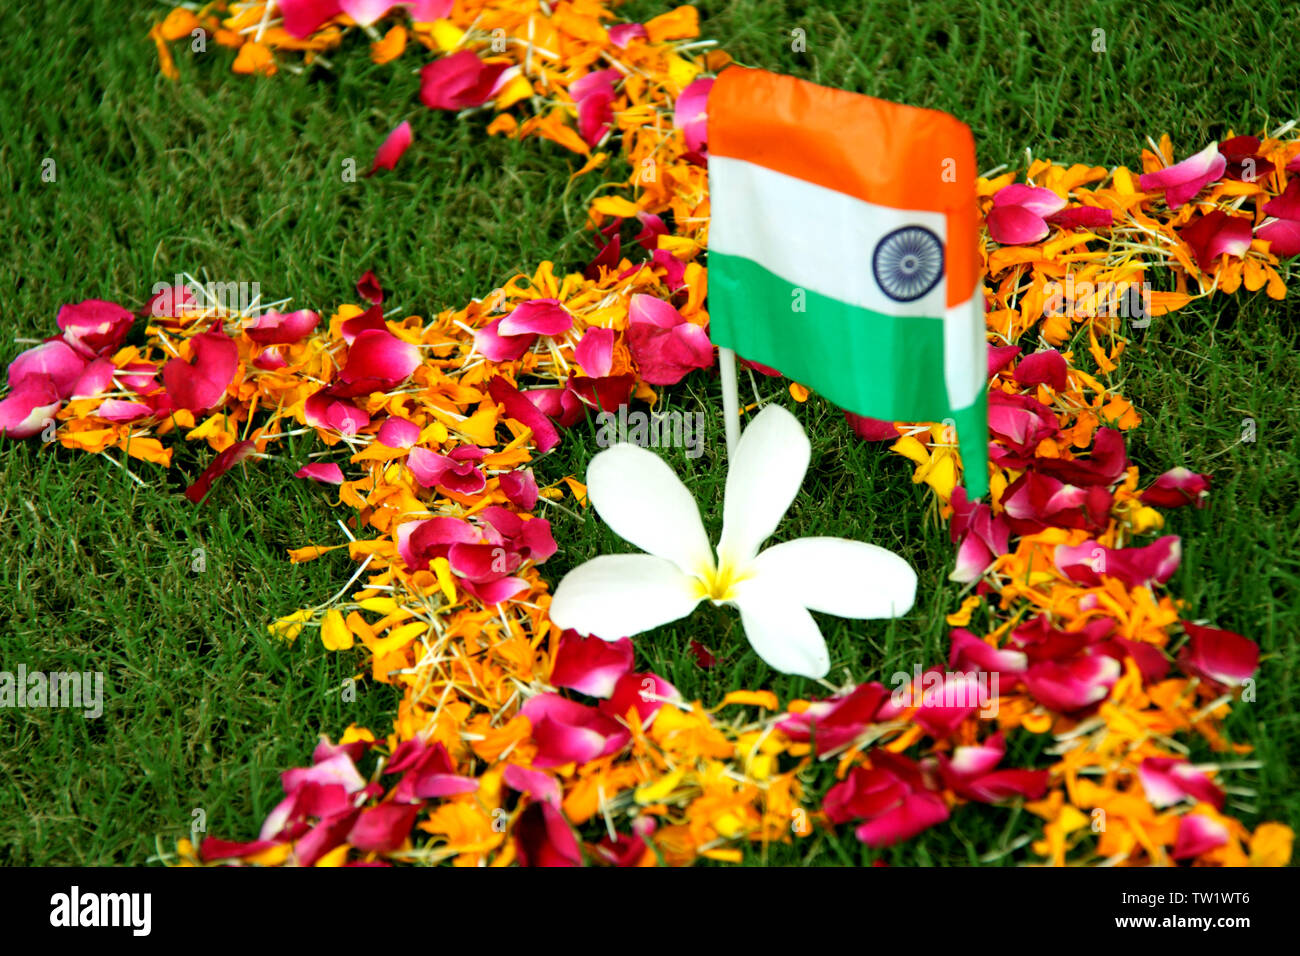 Close up of an Indian flag Stock Photo